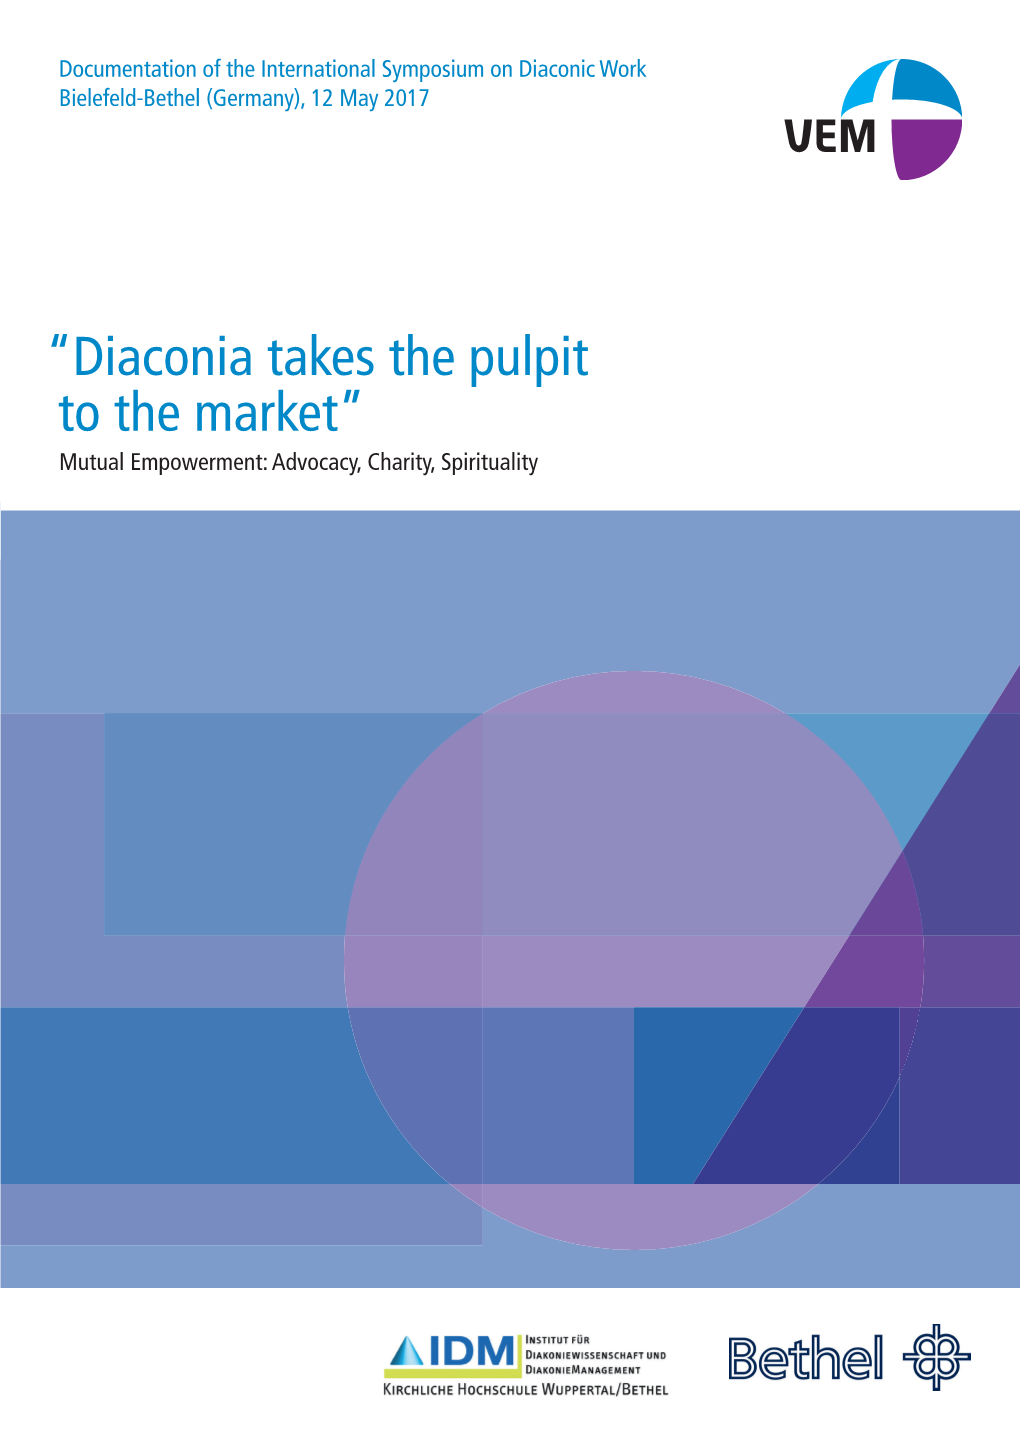 “Diaconia Takes the Pulpit to the Market”